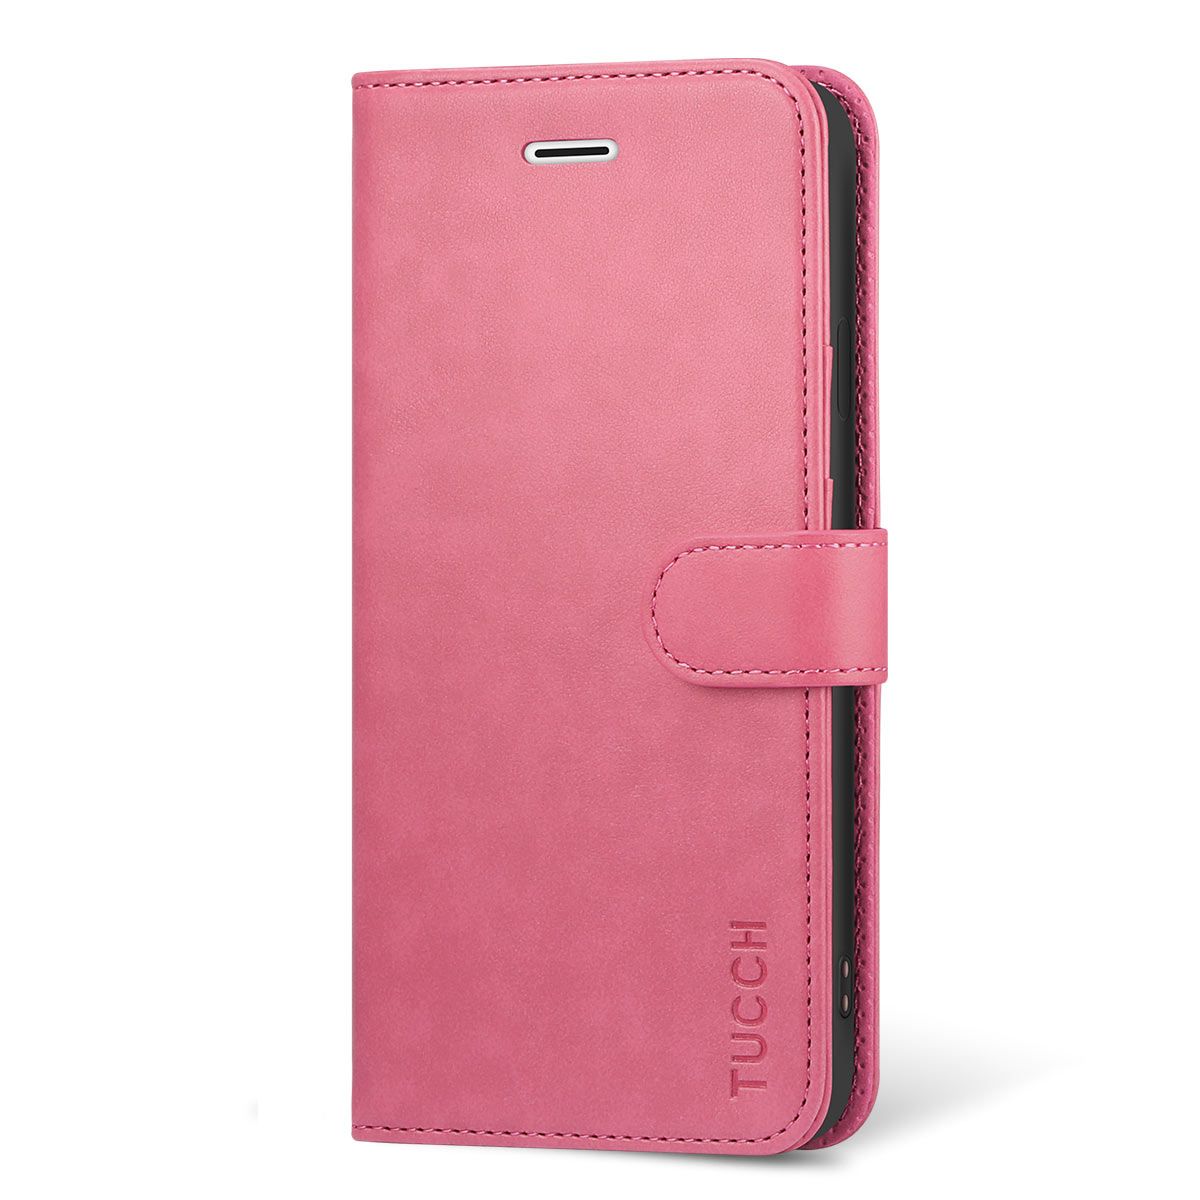 huilen limoen domein TUCCH iPhone 6s/6 Case, Stand Holder and Magnetic Closure, Flip Folio Wallet  Case